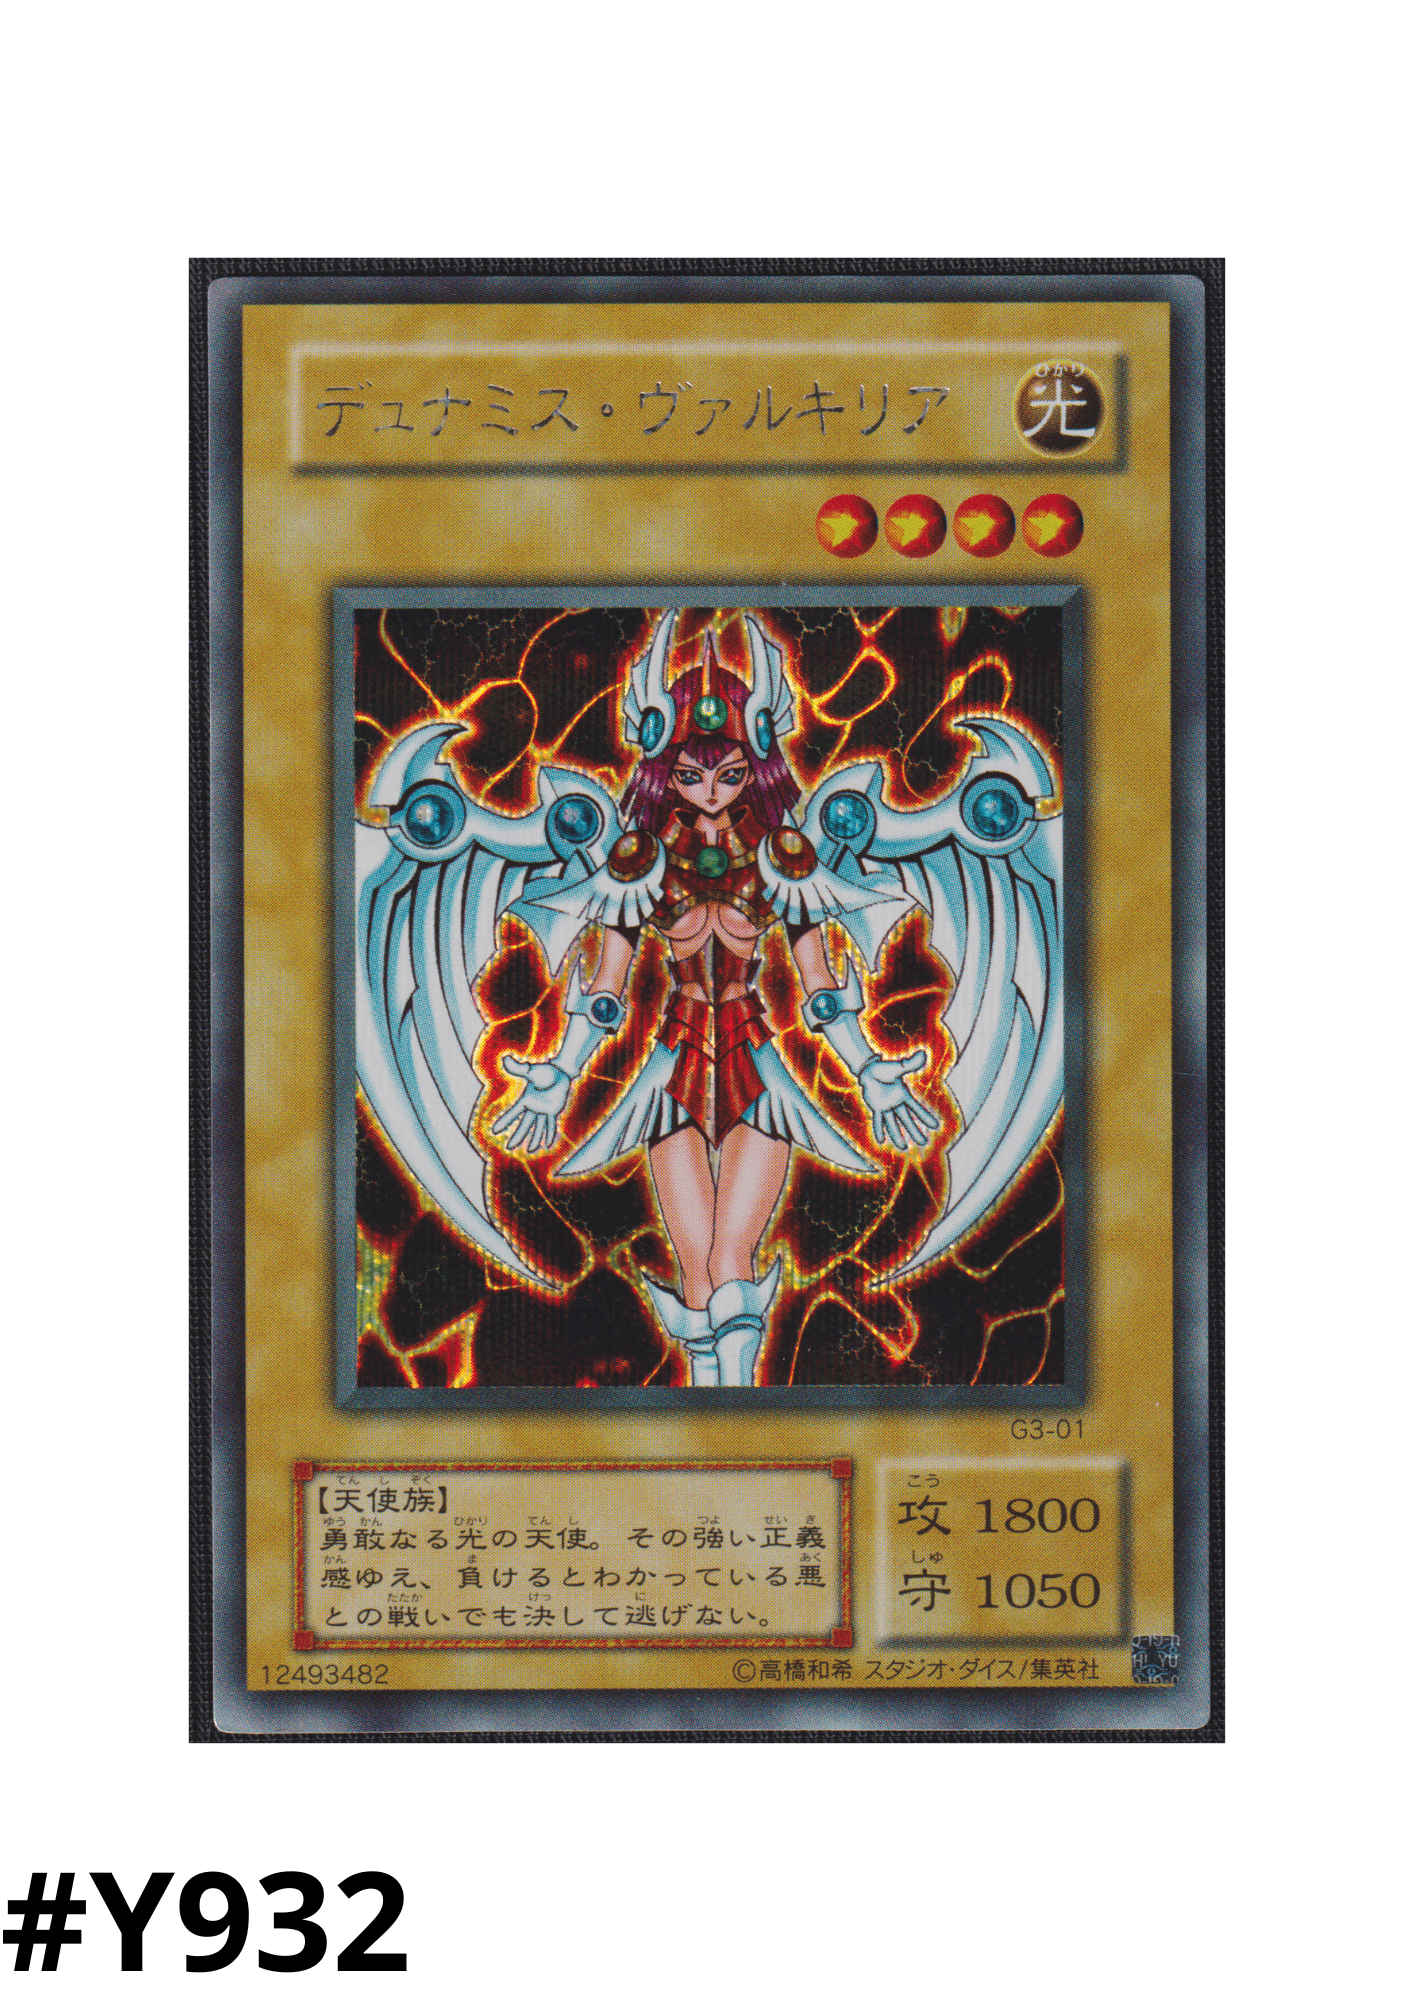 Dunames Dark Witch G3-01 | Yu-Gi-Oh! Duel Monsters III: Tri-Holy God Advent pre-order promotional card